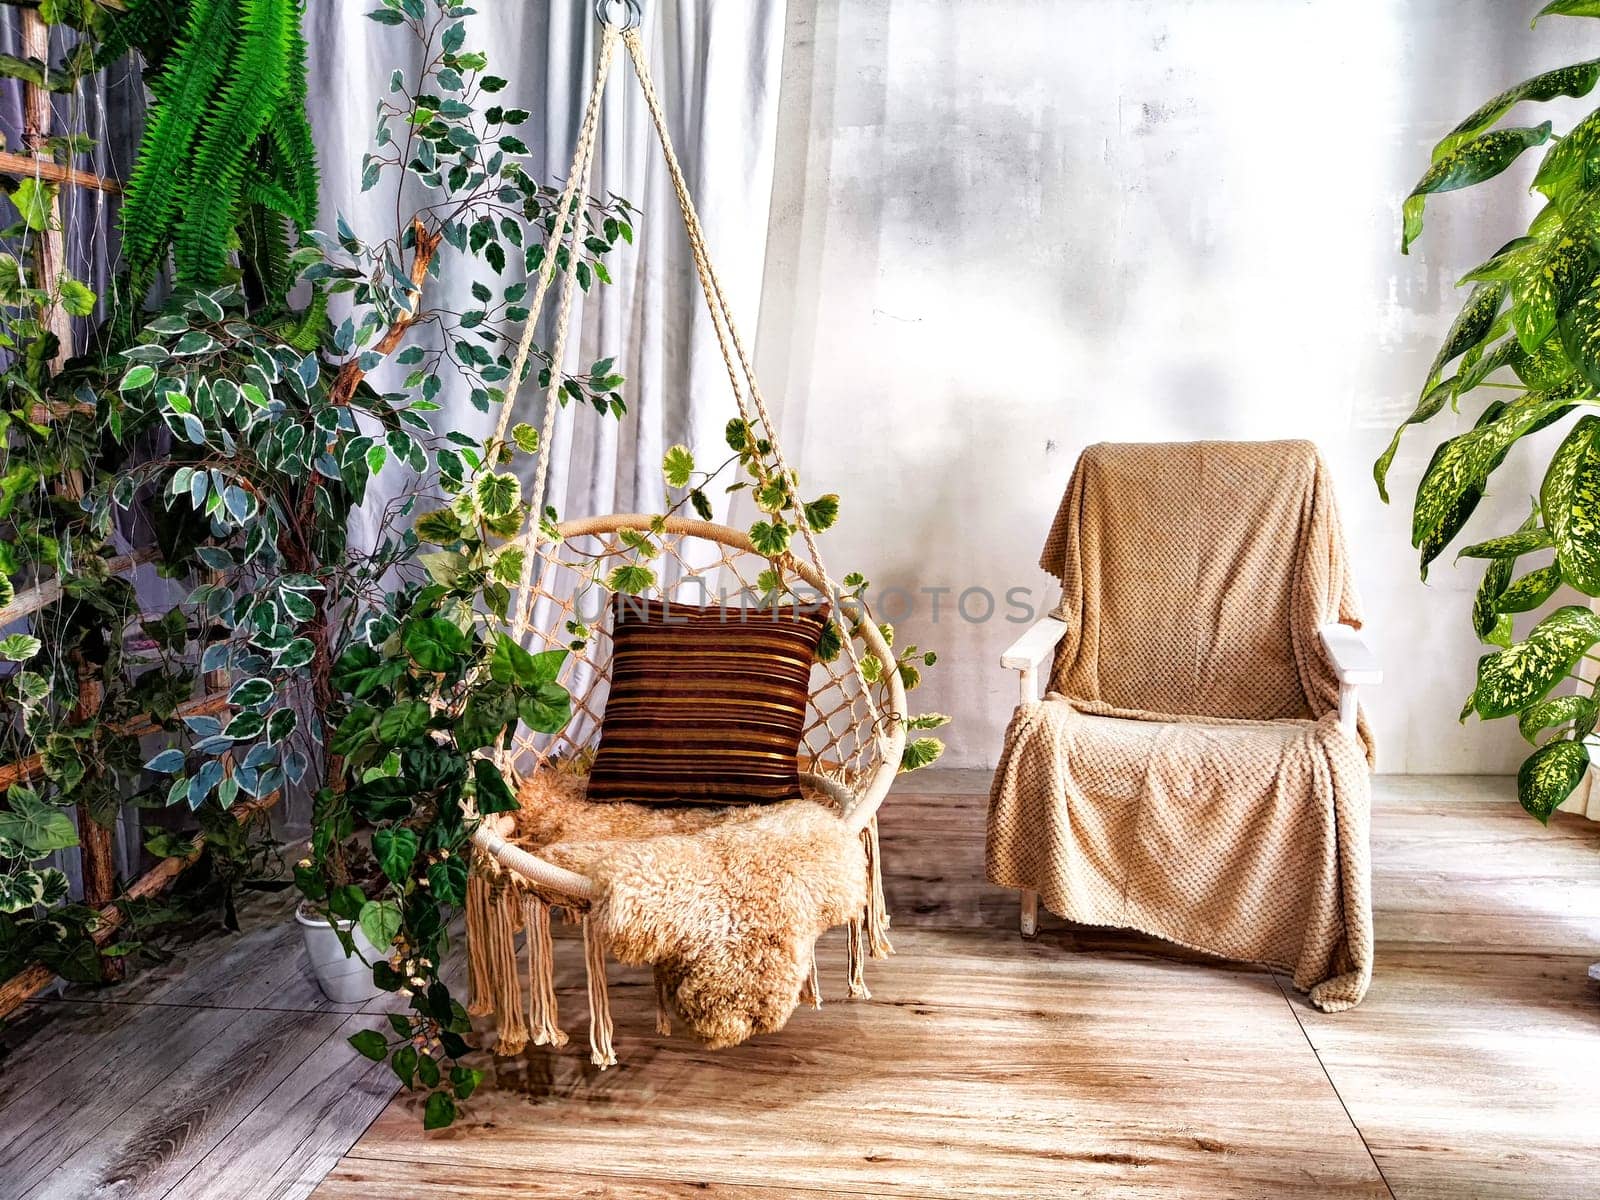 Mdern cozy beautiful room with braided rope macrame chair, green plants and window with curtains. Interior and background, Location for photo shooting